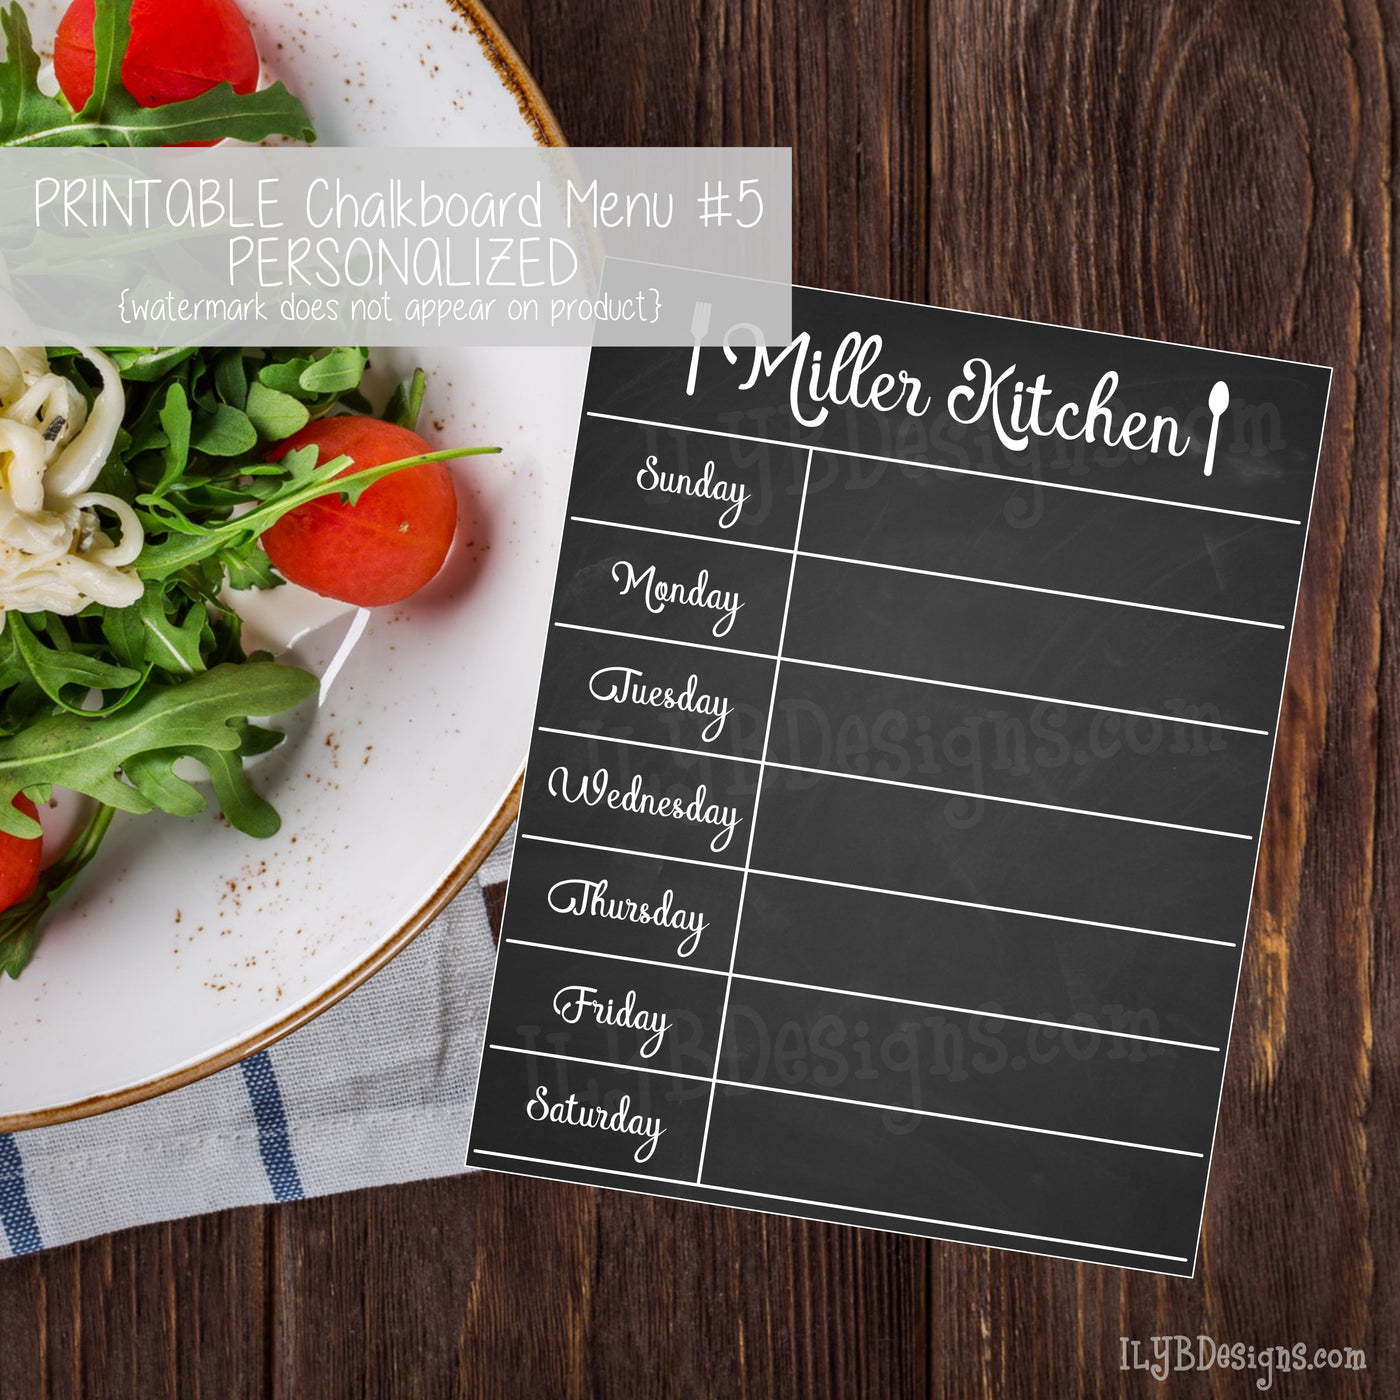 Printable 8"x10" weekly menu with a black chalkboard background. A white script font says, "Miller Kitchen" at the top flanked by a white fork and spoon. The name is personalized for your order. The days of the week are also in a white script font aligned vertically down the left side. Lines separate each day so there is space to write in a weekly menu.